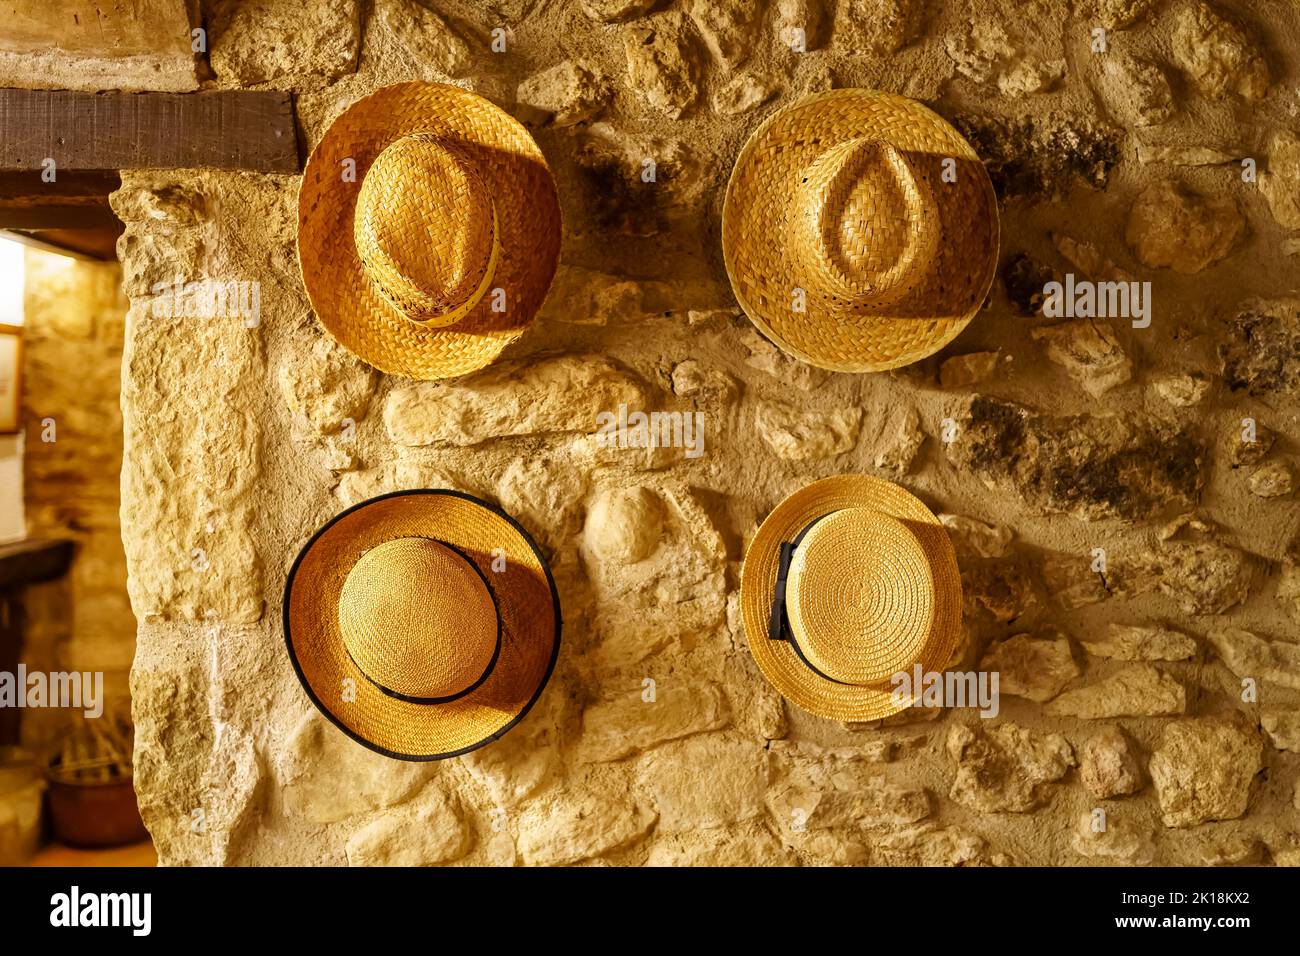 Straw hats hanging on the wall of an old retro-style house reminiscent of times gone by. Stock Photo